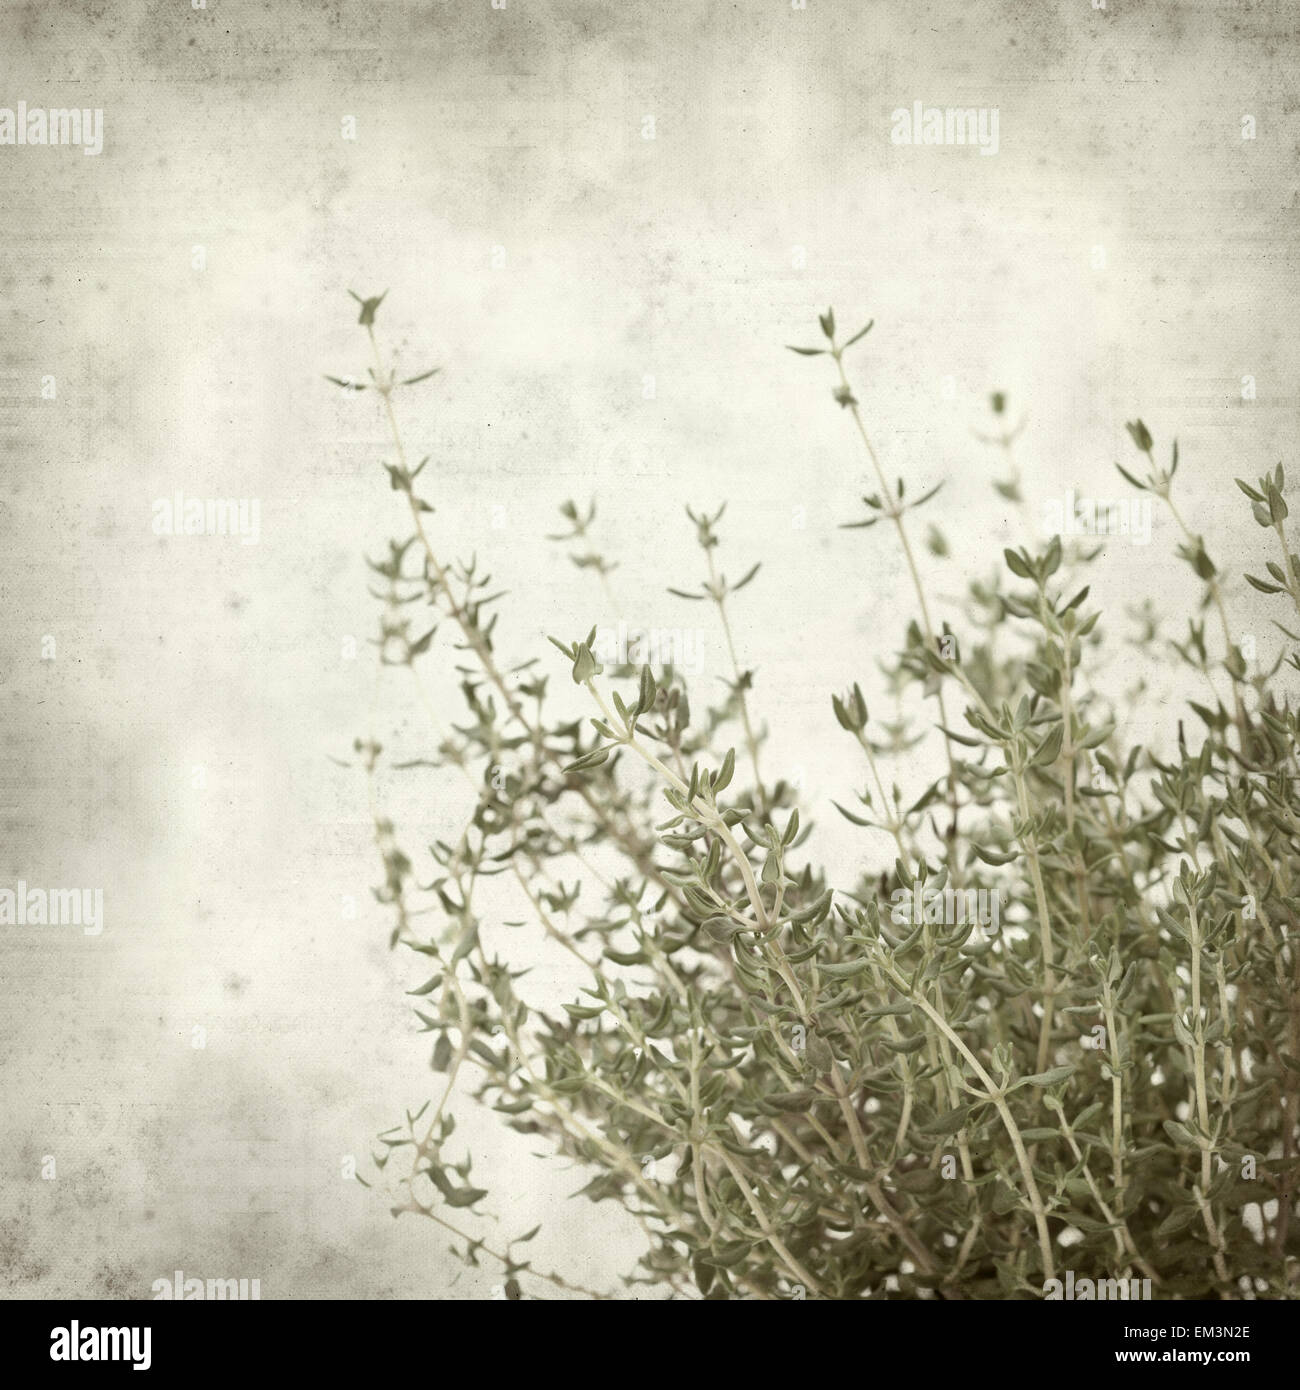 textured old paper background with growing thyme plant Stock Photo